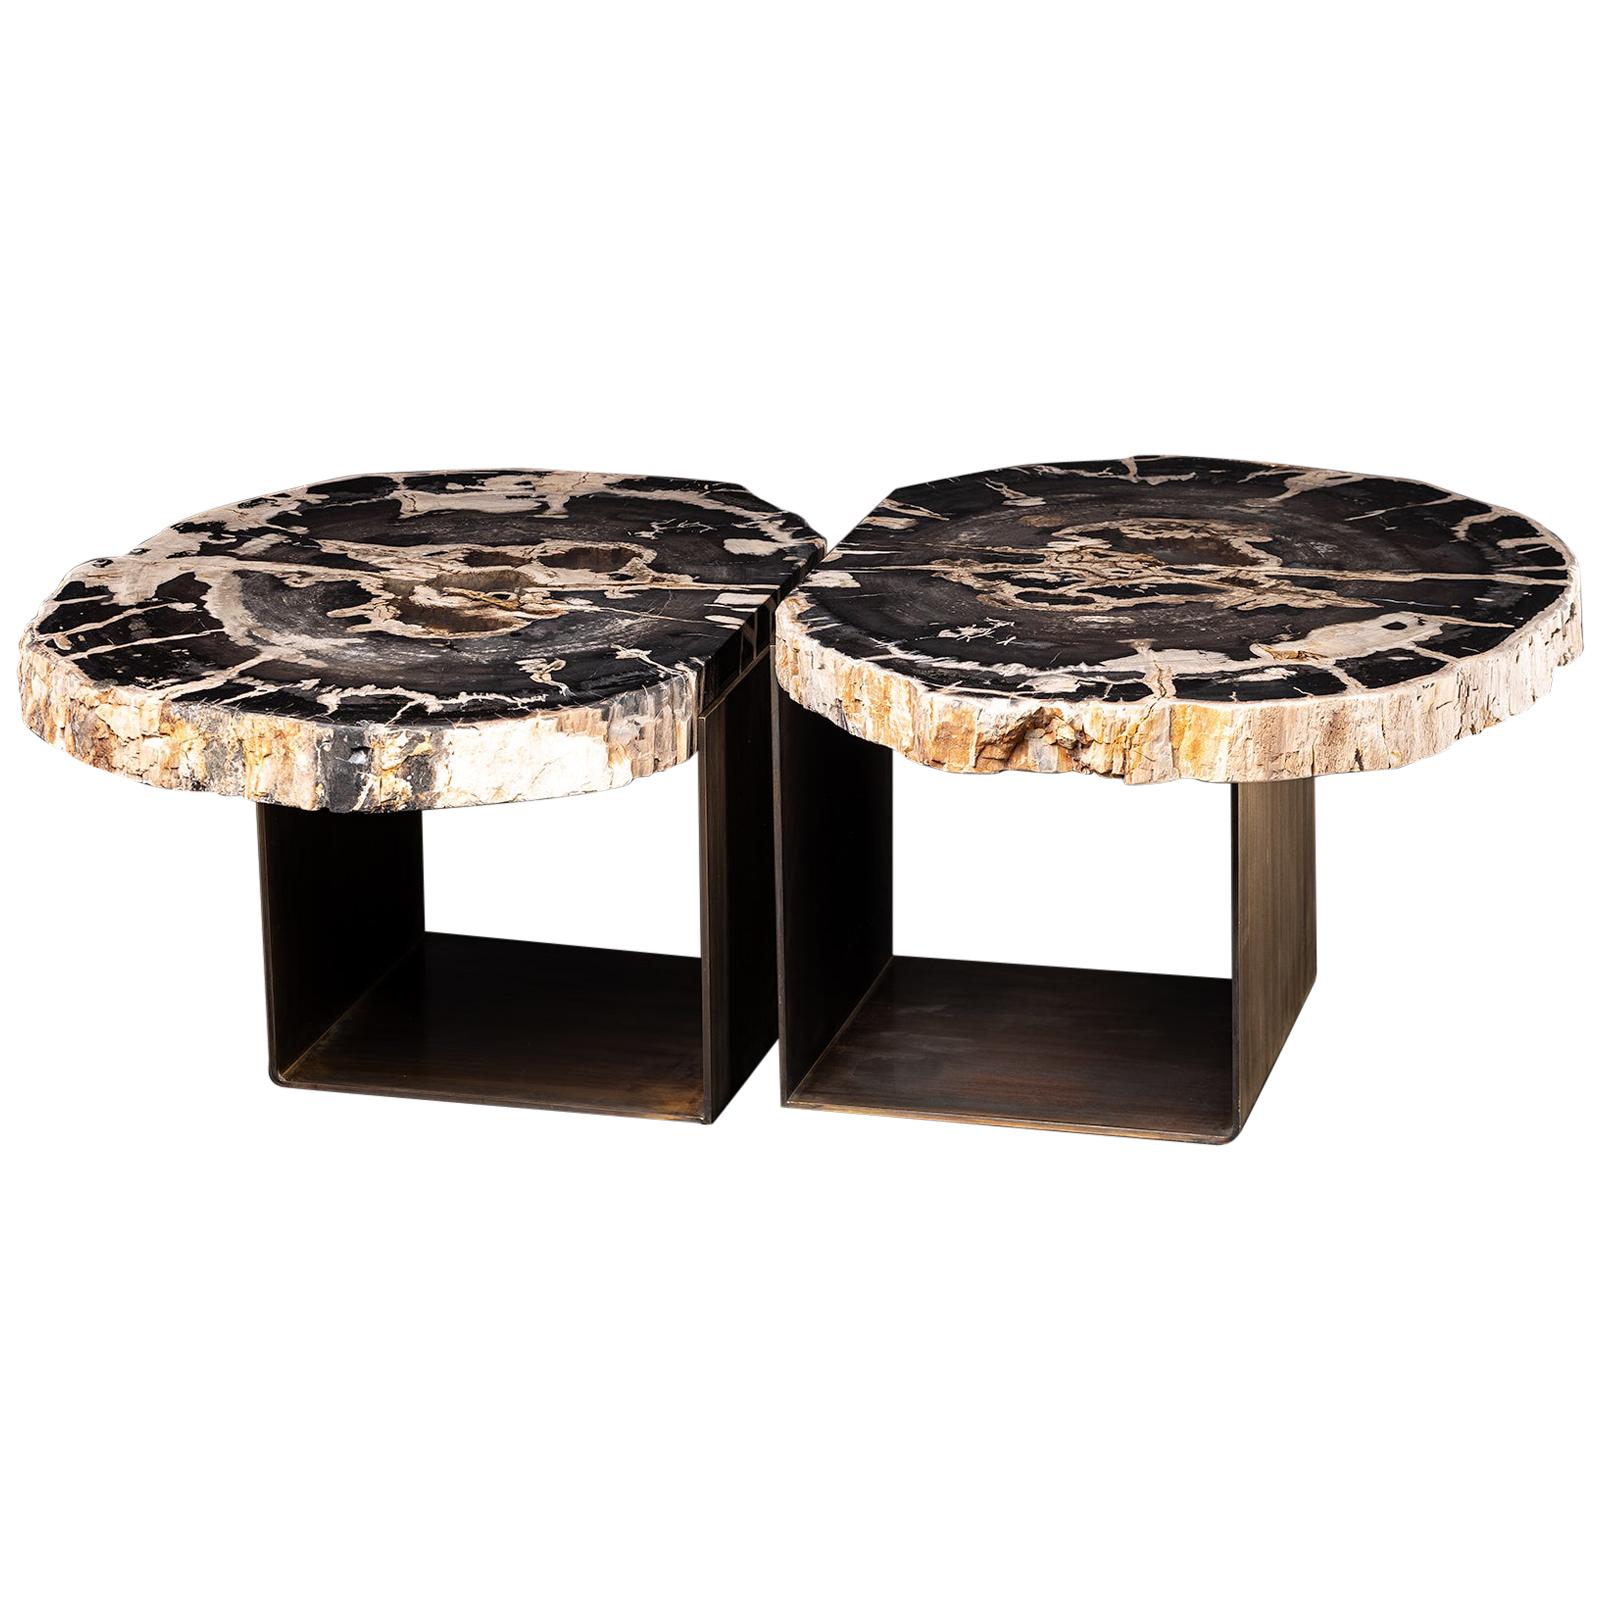 Center Table, Double Petrified Wood Table with Brass-Plated Metal Base